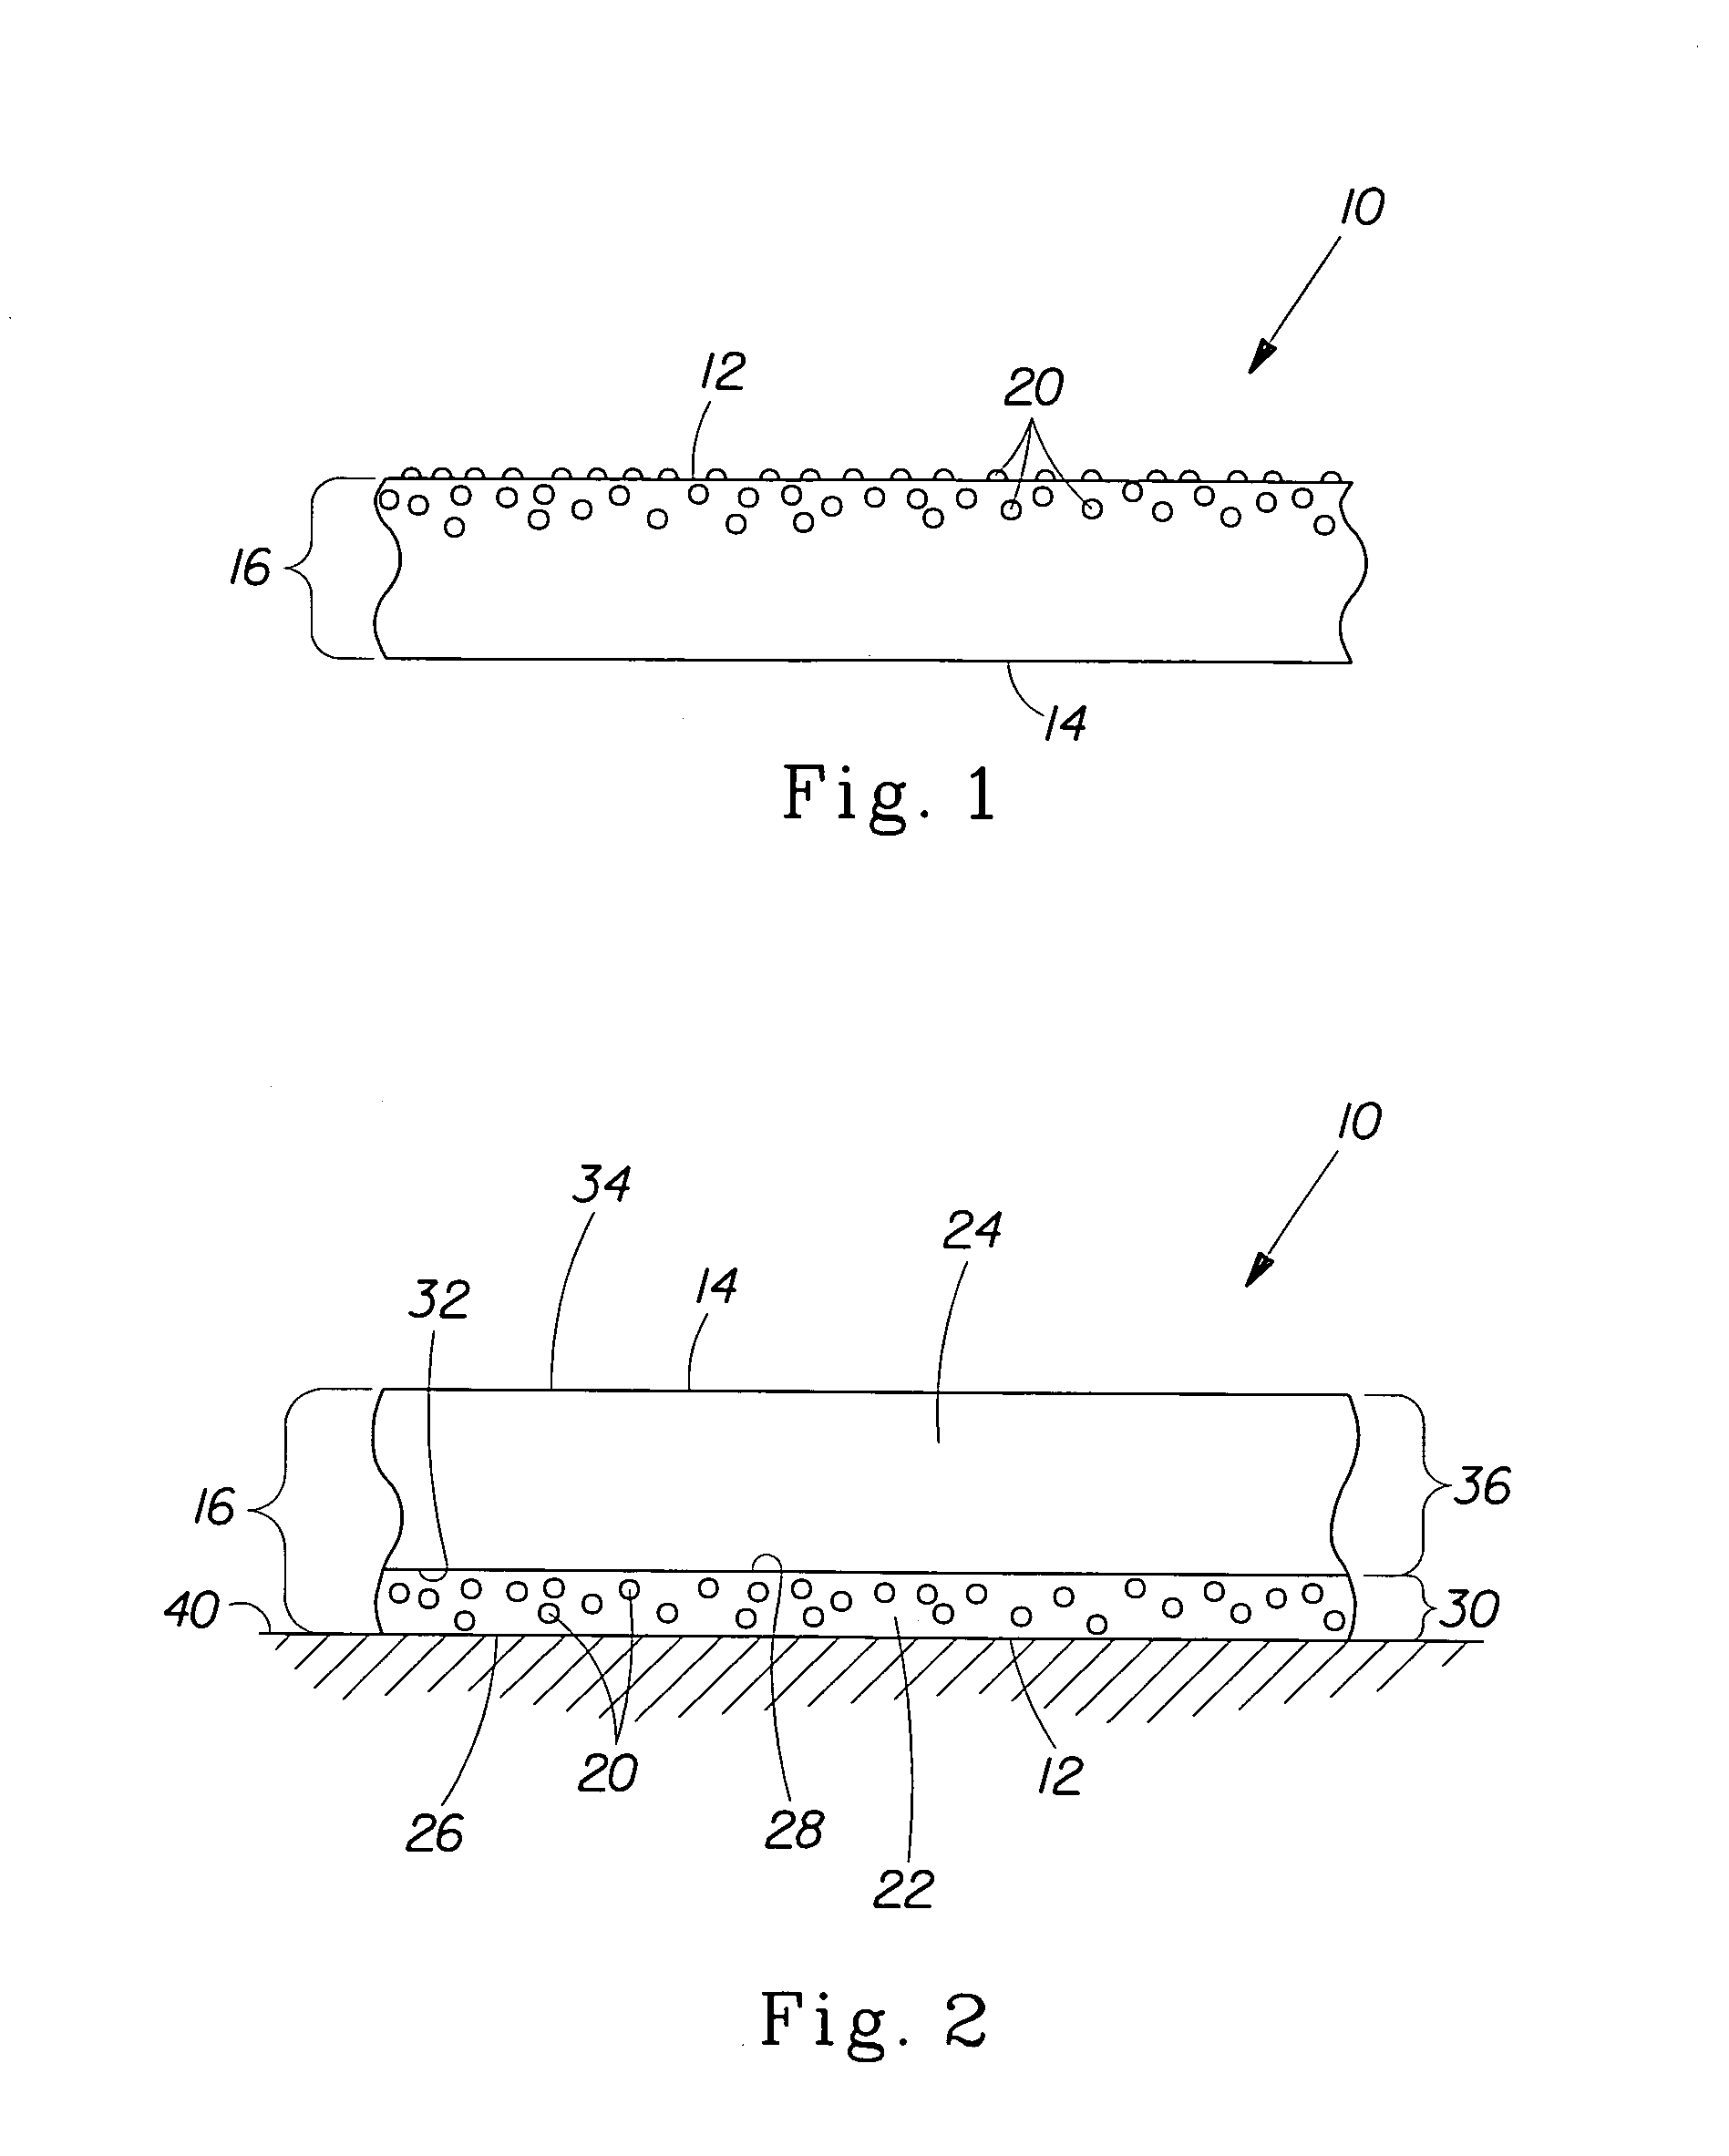 Methods of making water-soluble film with resistance to solubility prior to being immersed in water